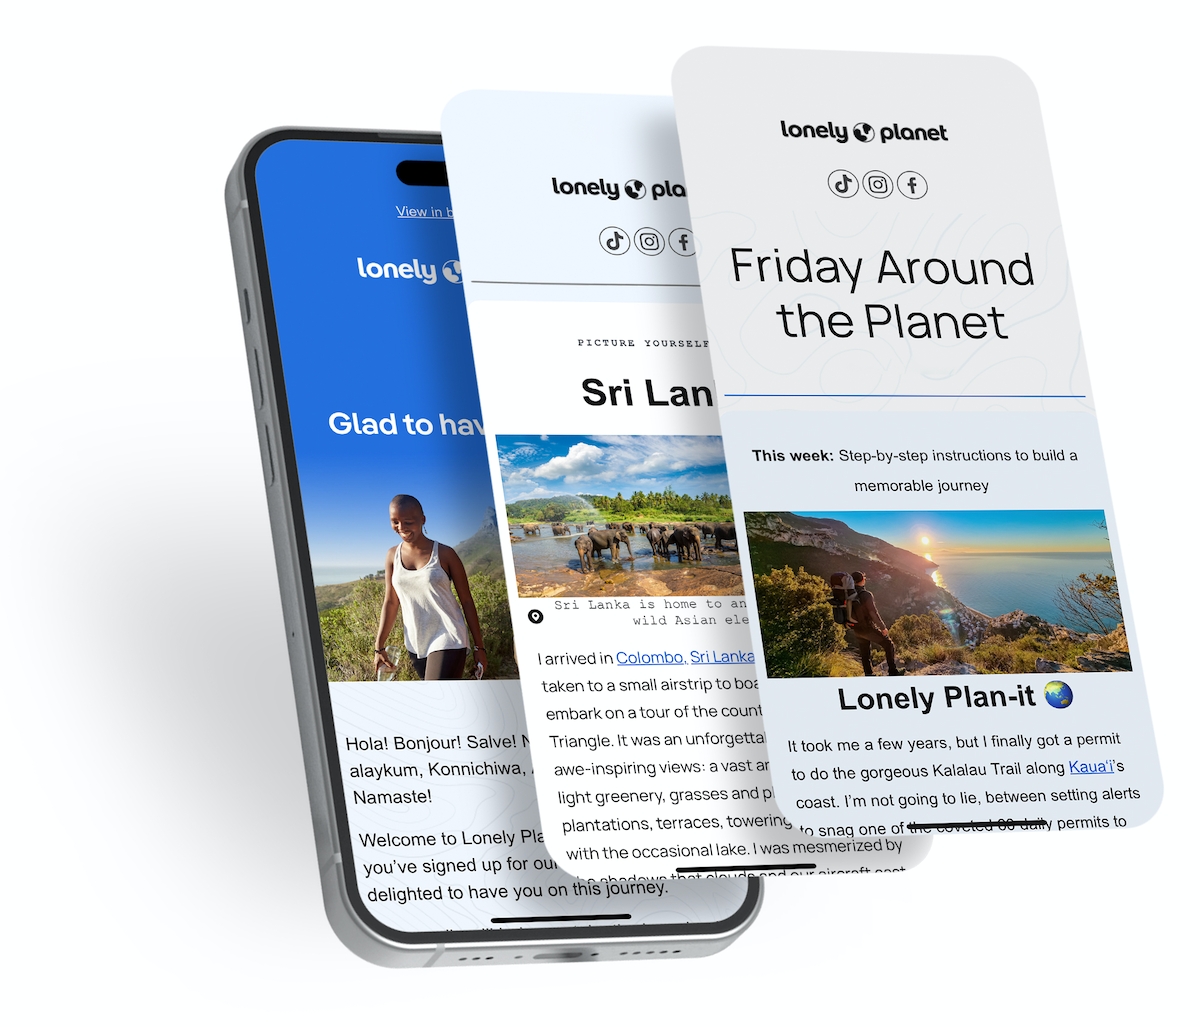 smartphone showing a Lonely Planet email newsletter